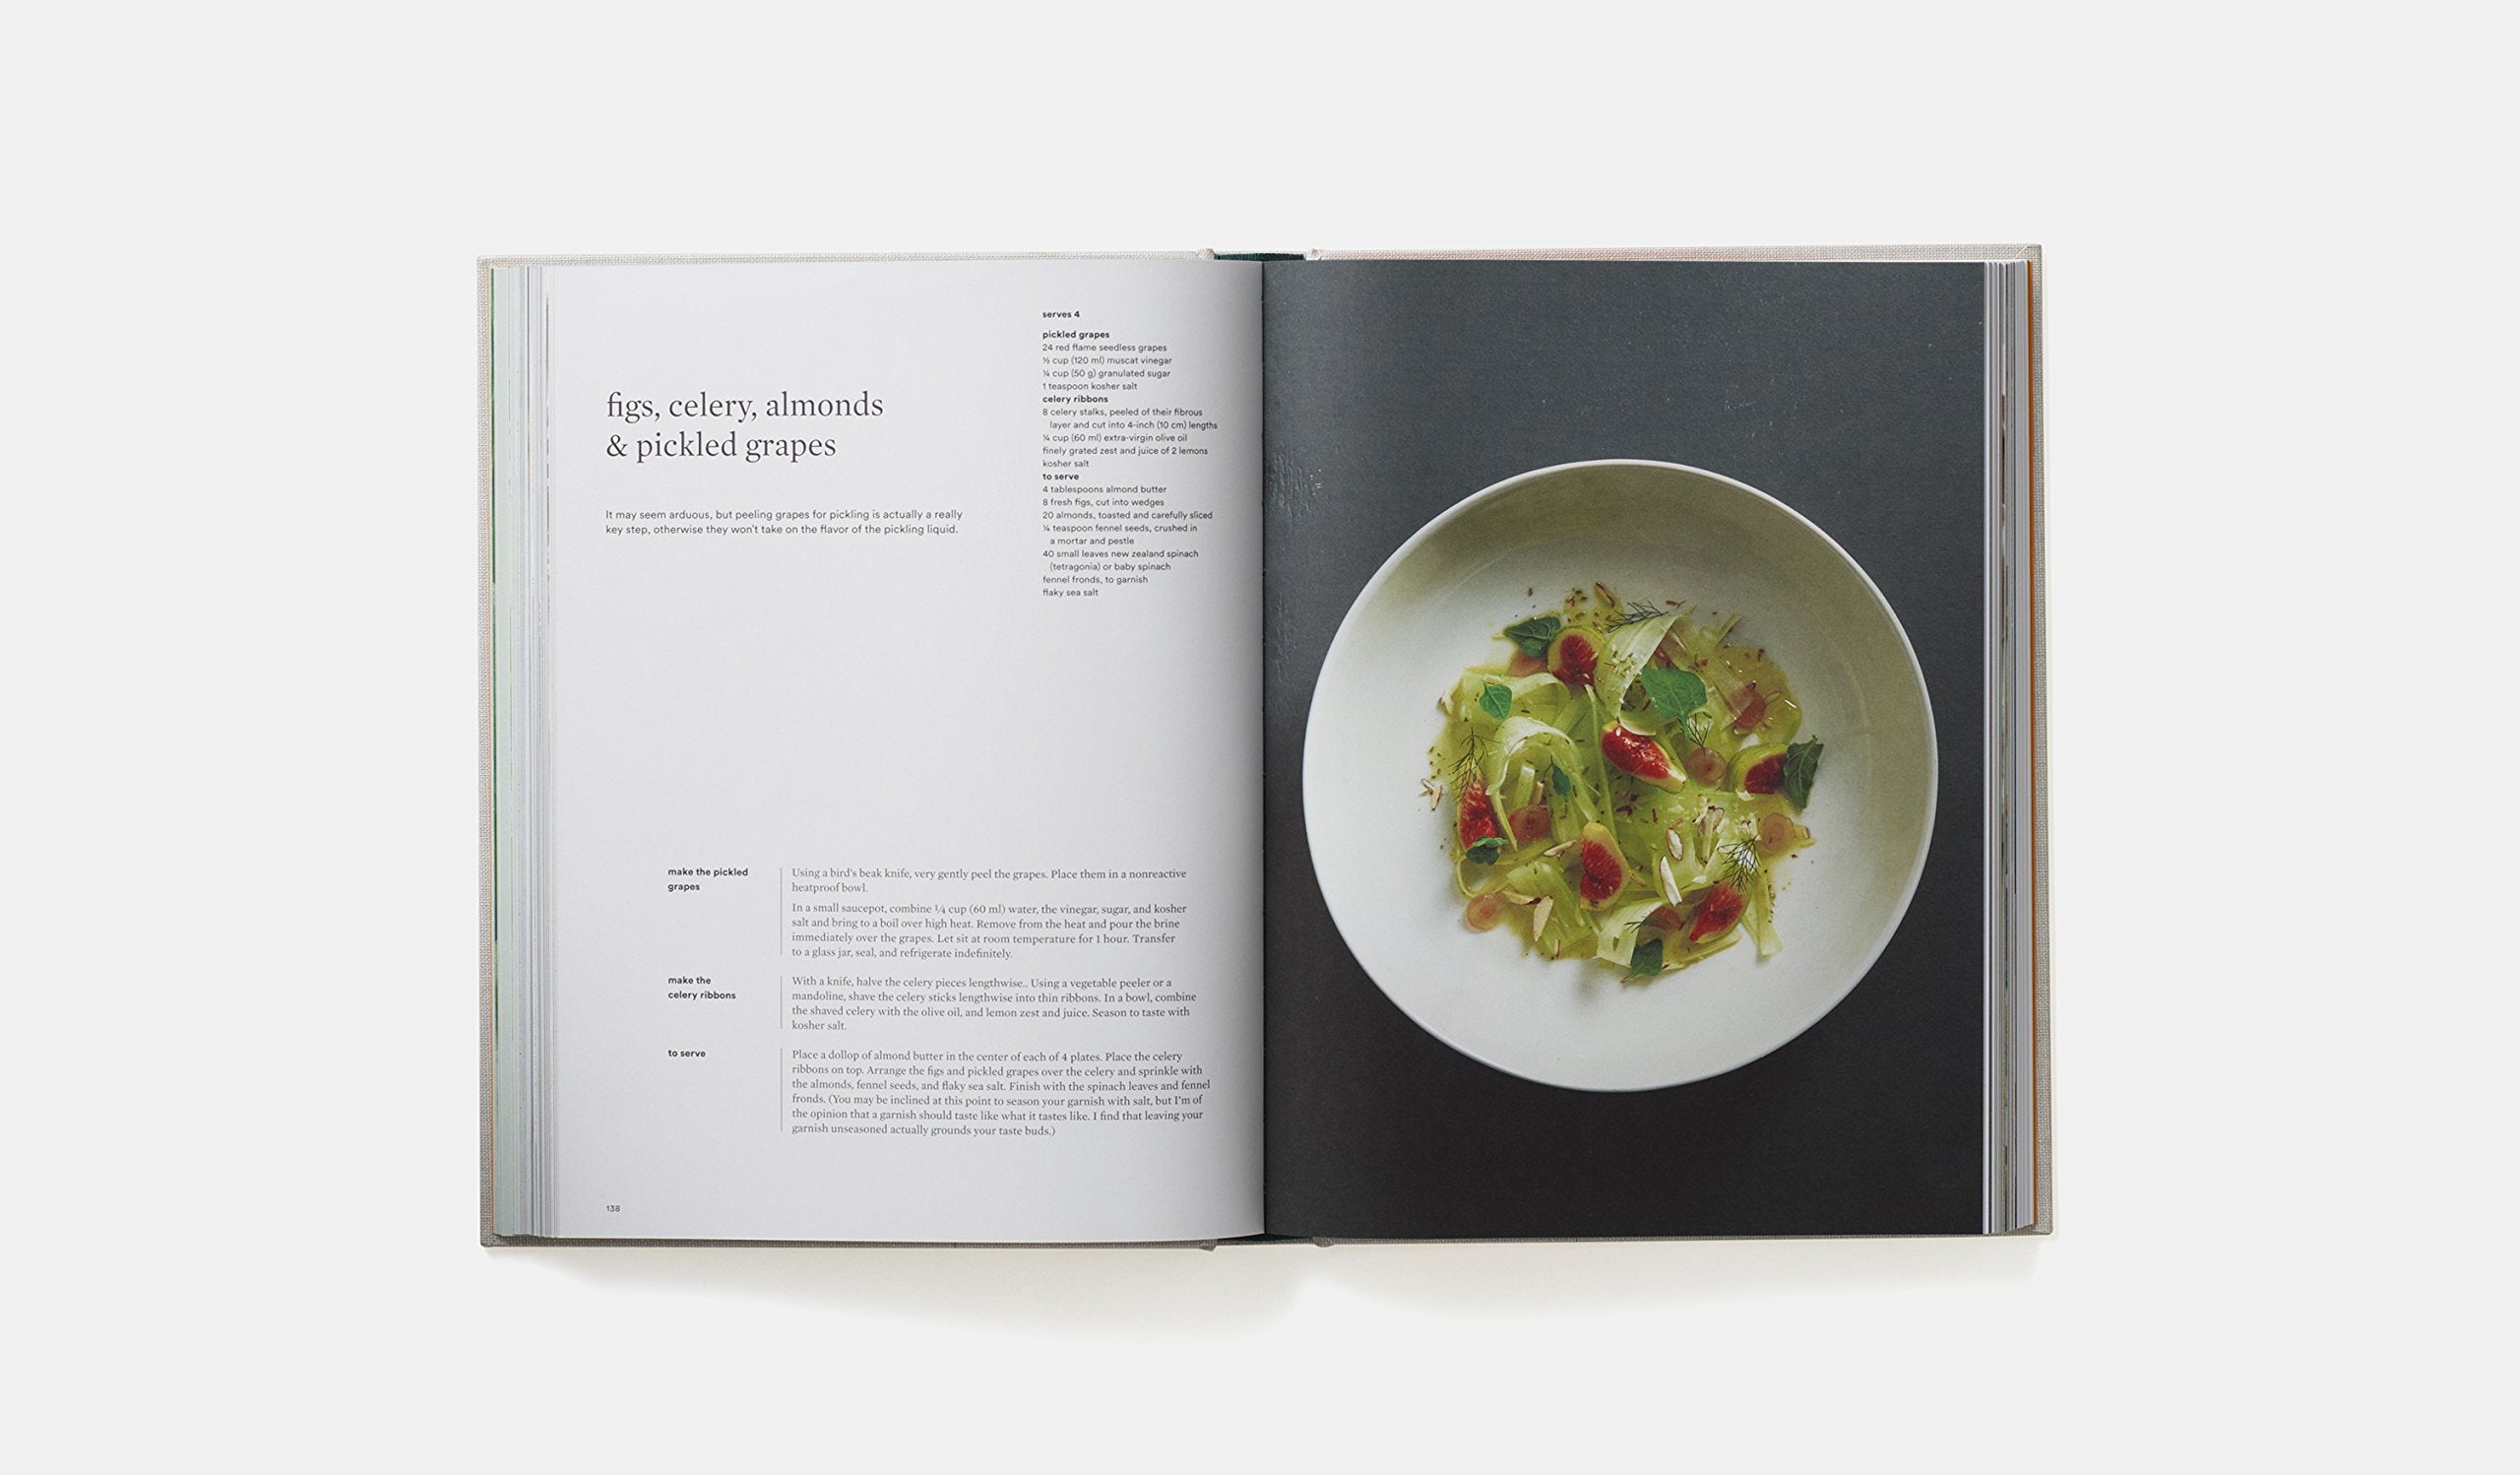 On Vegetables: Modern Recipes for the Home Kitchen (Jeremy Fox)